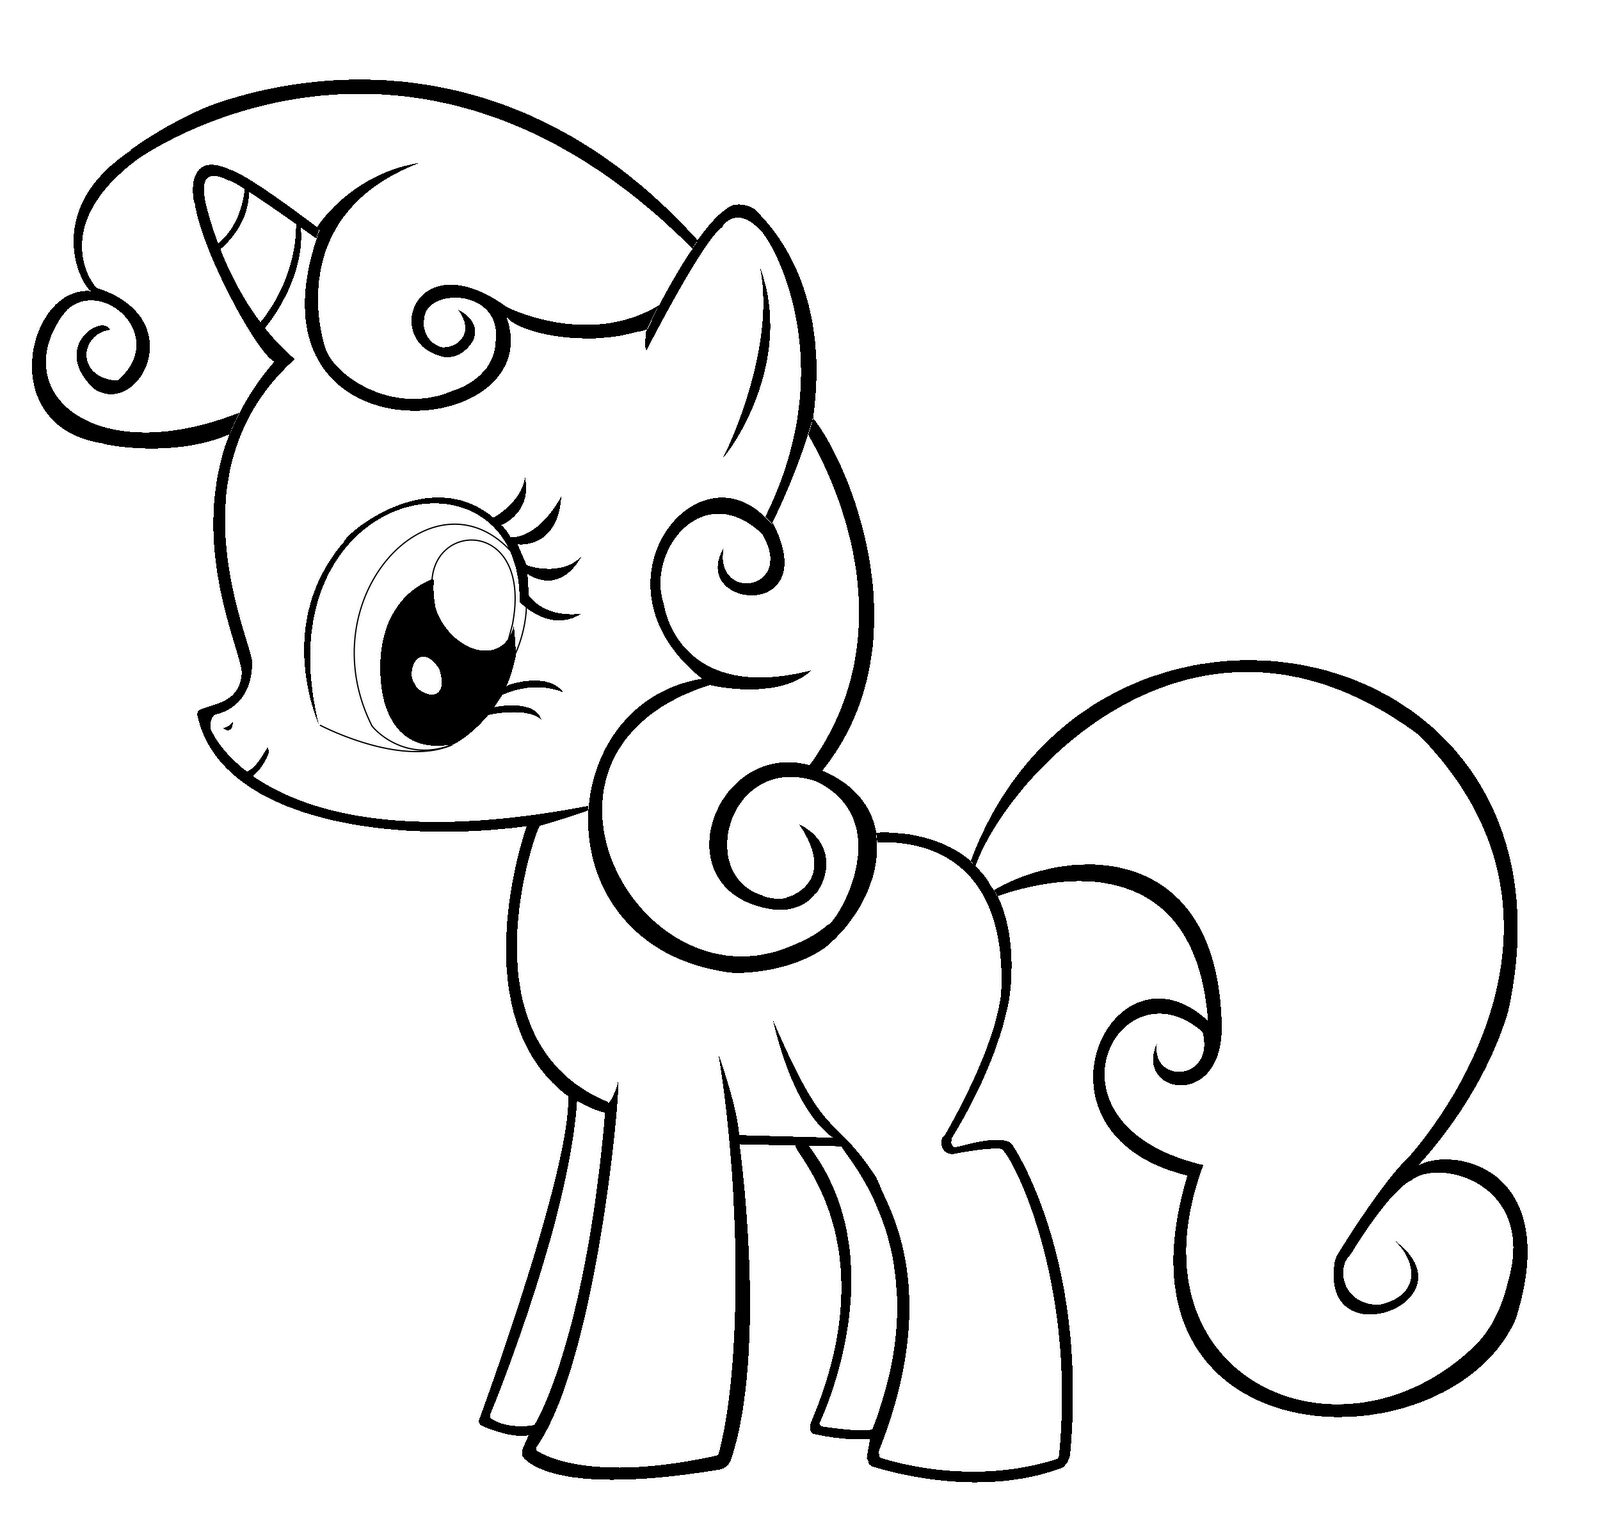 Free Printable My Little Pony Coloring Pages For Kids HD Wallpapers Download Free Images Wallpaper [wallpaper896.blogspot.com]